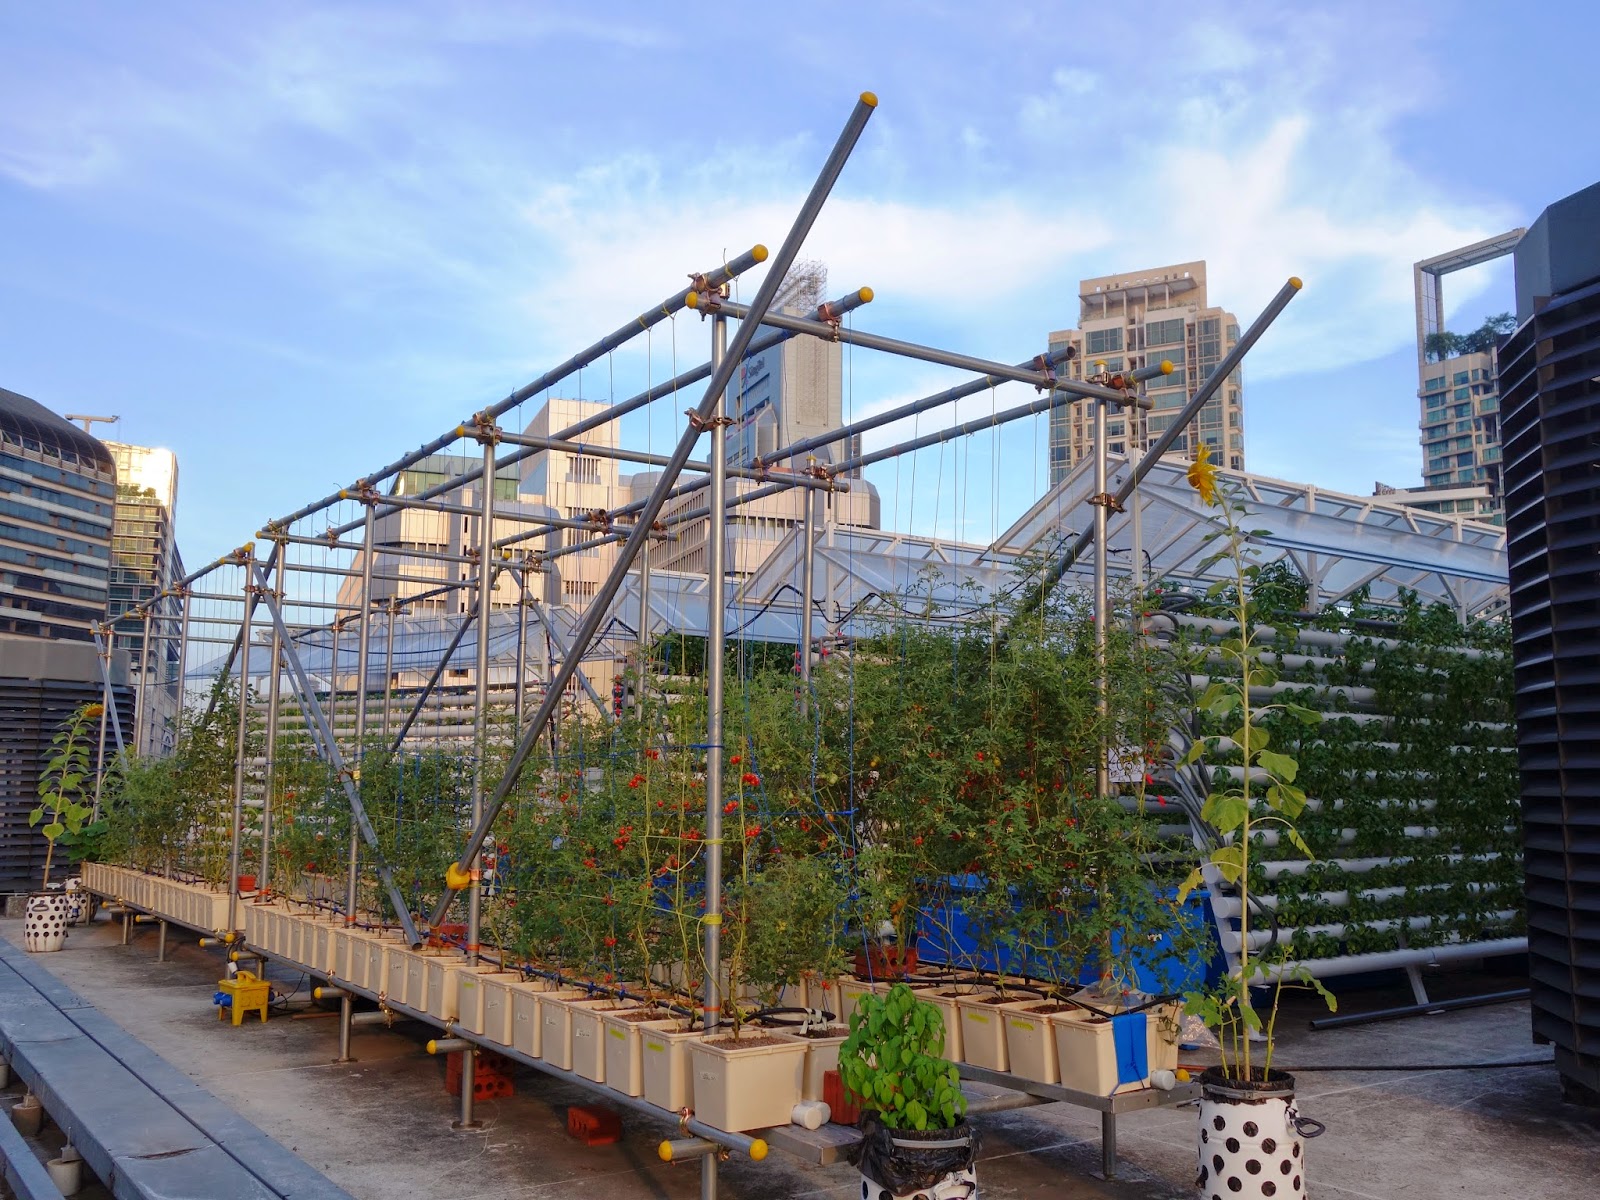  Singapore's First Rooftop Aquaponic Farm In The Heart Of Orchard Road